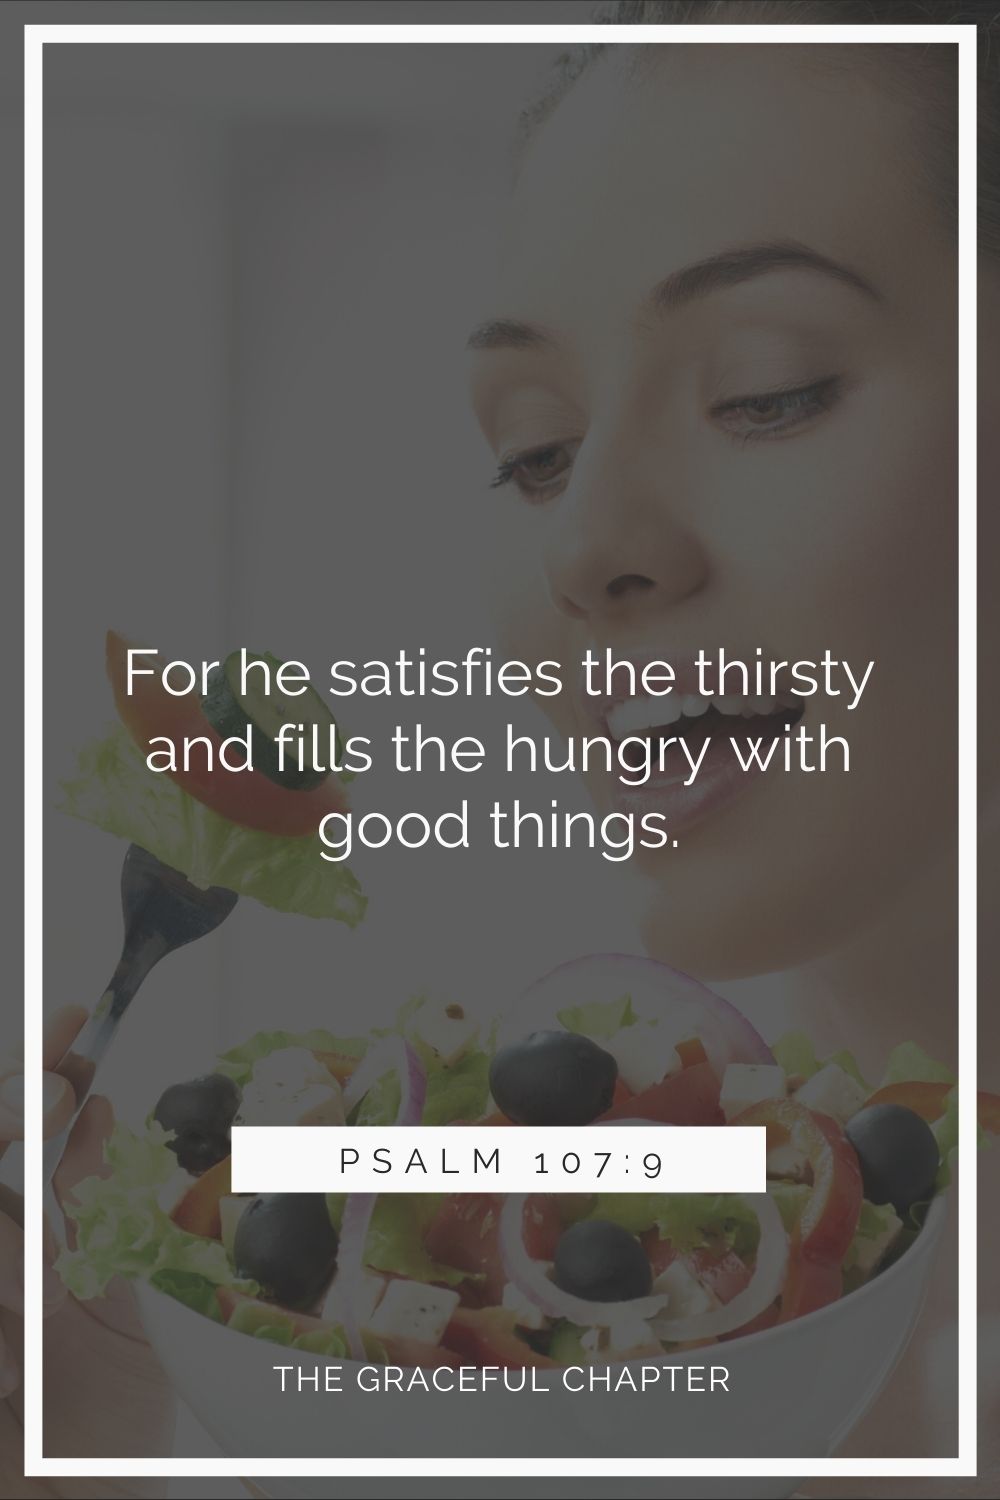 for he satisfies the thirsty and fills the hungry with good things. Psalm 107:9